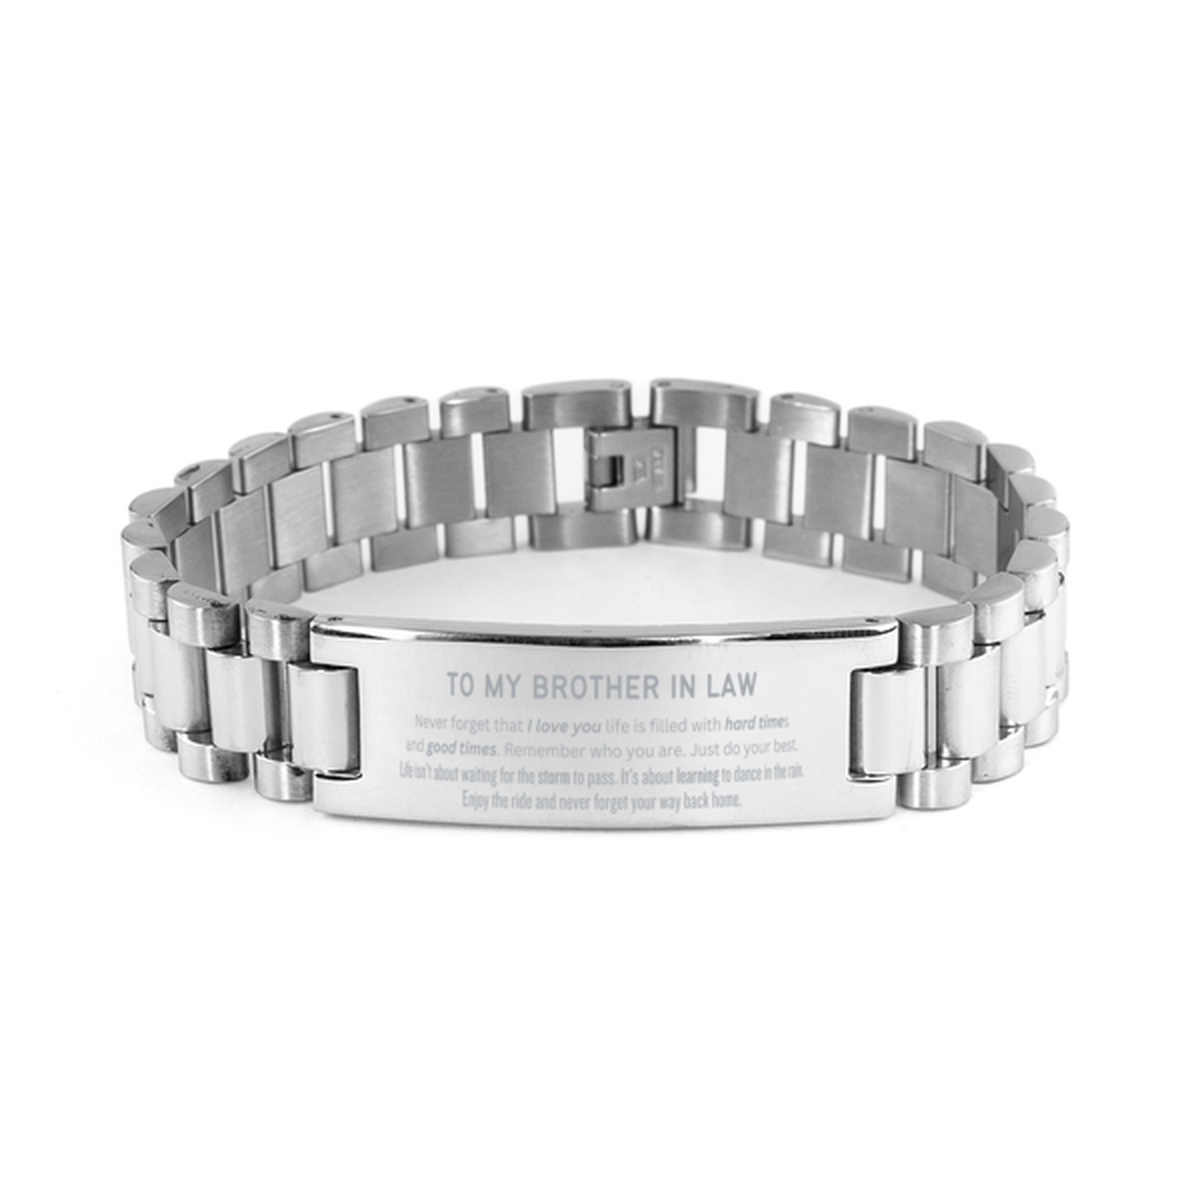 Christmas Brother In Law Ladder Stainless Steel Bracelet Gifts, To My Brother In Law Birthday Thank You Gifts For Brother In Law, Graduation Unique Gifts For Brother In Law To My Brother In Law Never forget that I love you life is filled with hard times a